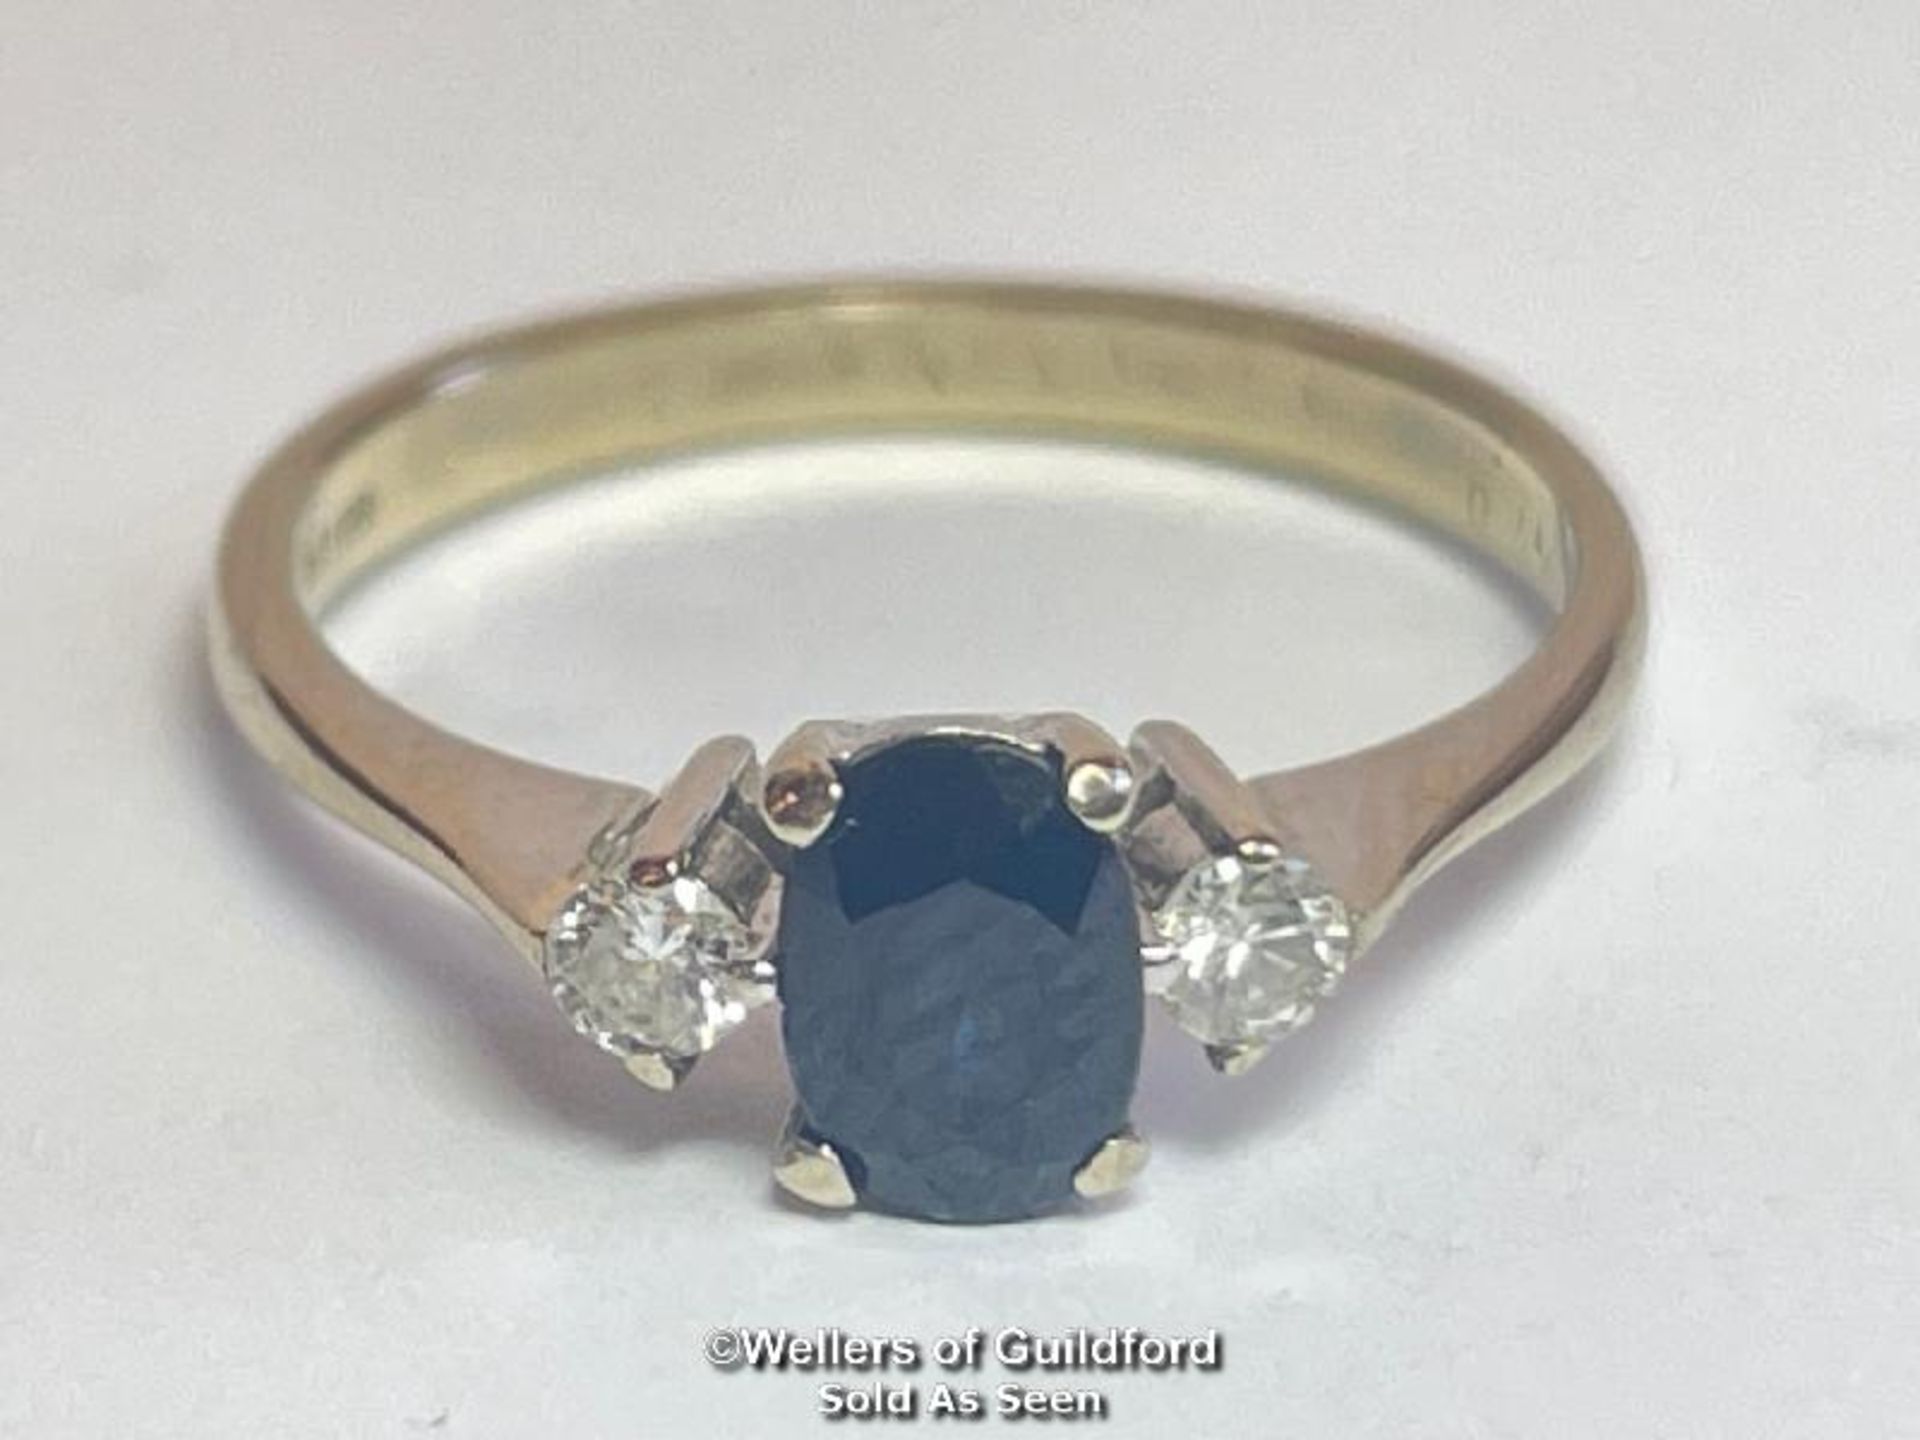 Oval sapphire and diamond three stone ring in 18ct gold. Estimated weight of saphire 0.67ct, - Image 2 of 6